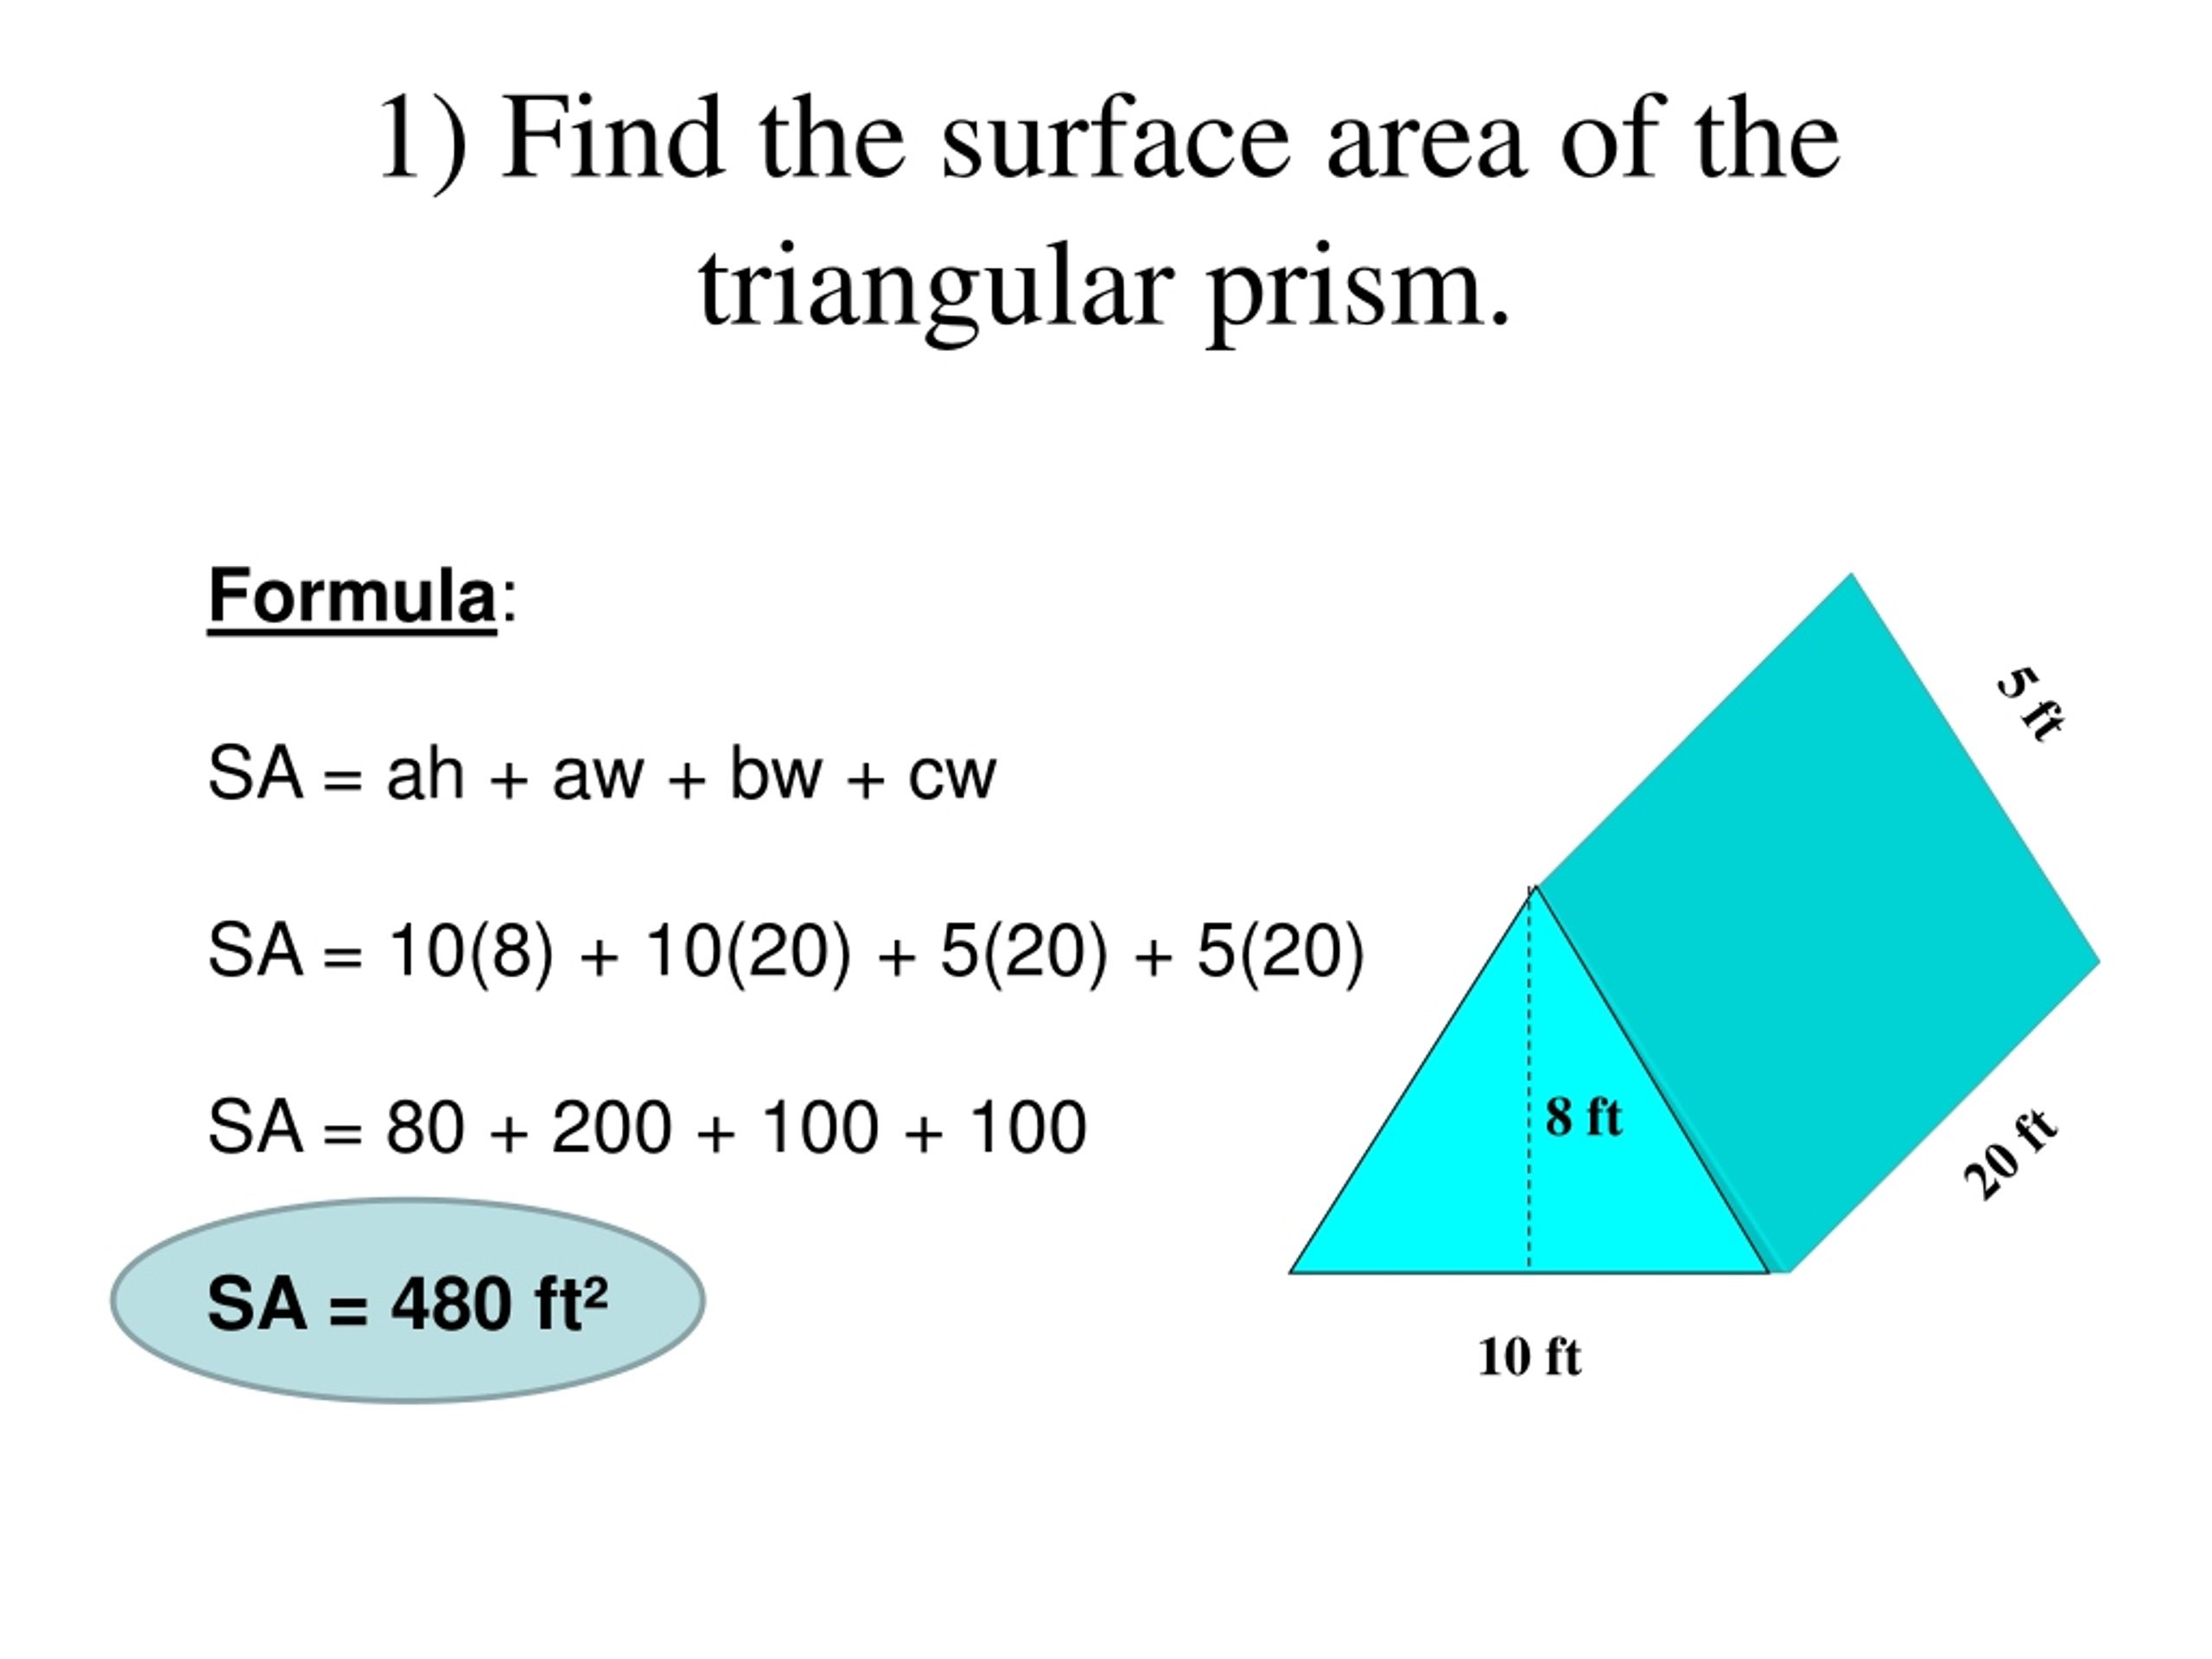 surface area of a prism formula and image